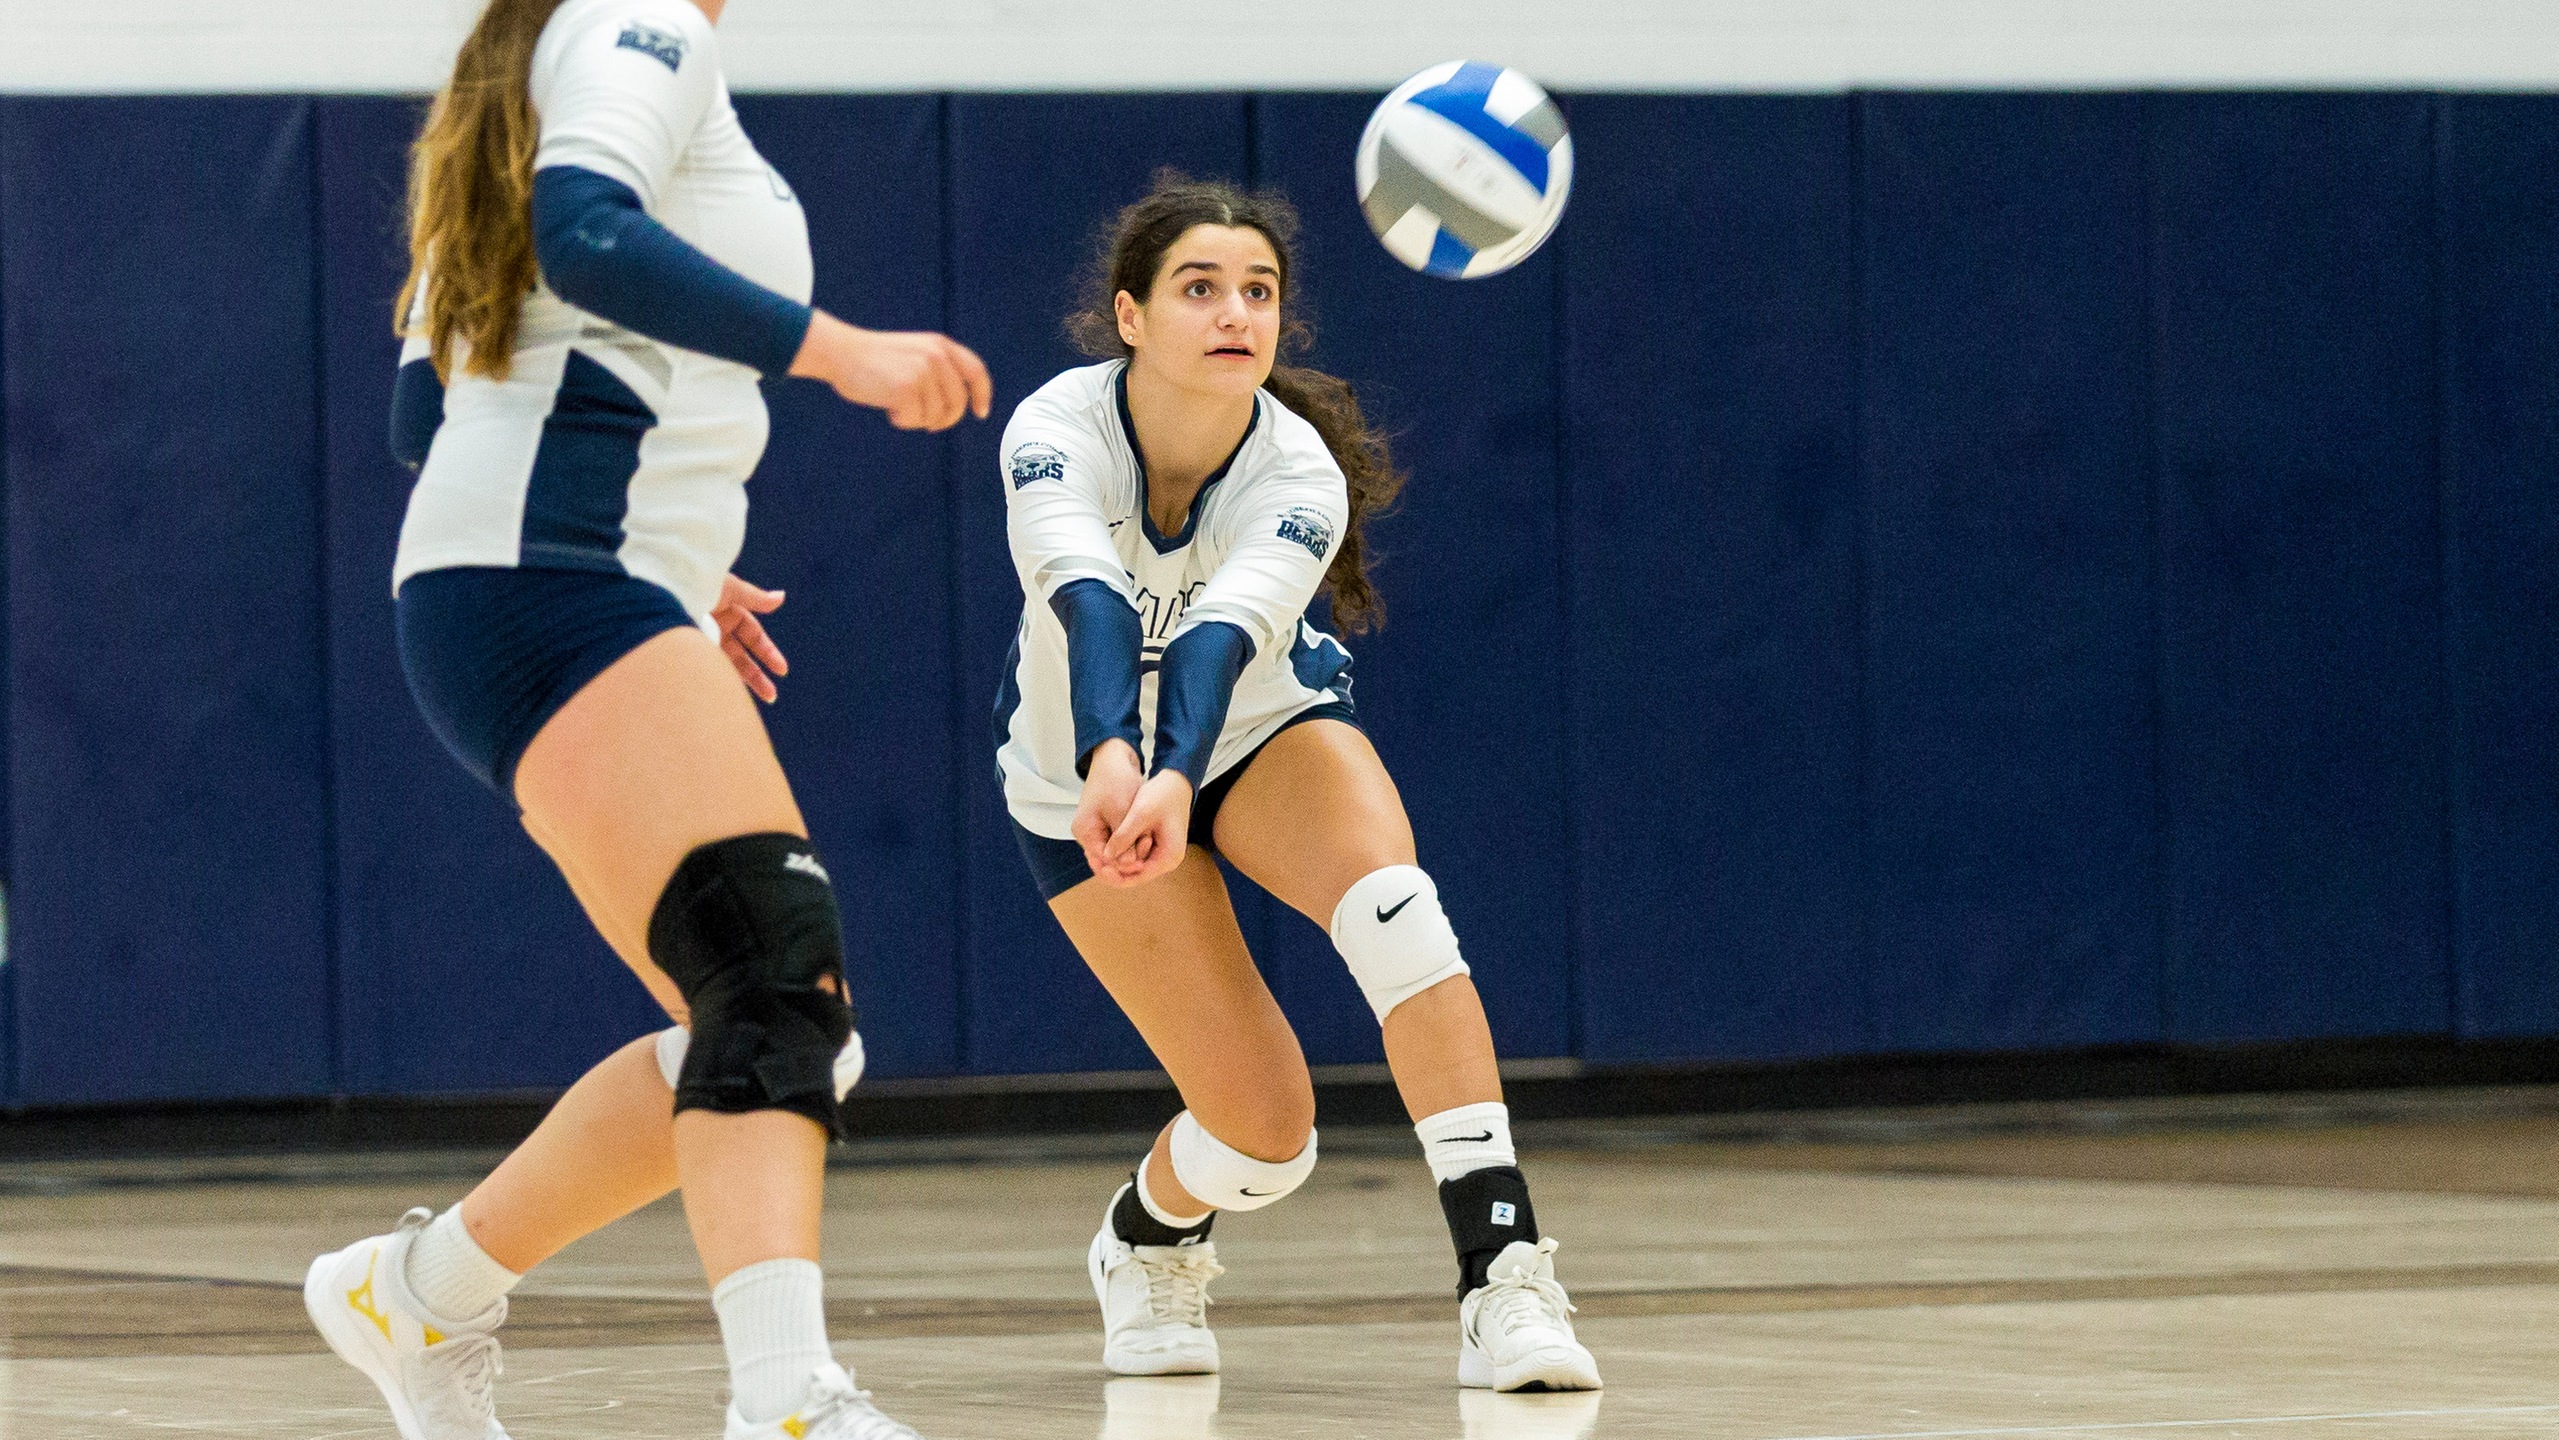 Women's Volleyball Falls to Farmingdale State in Straight Sets